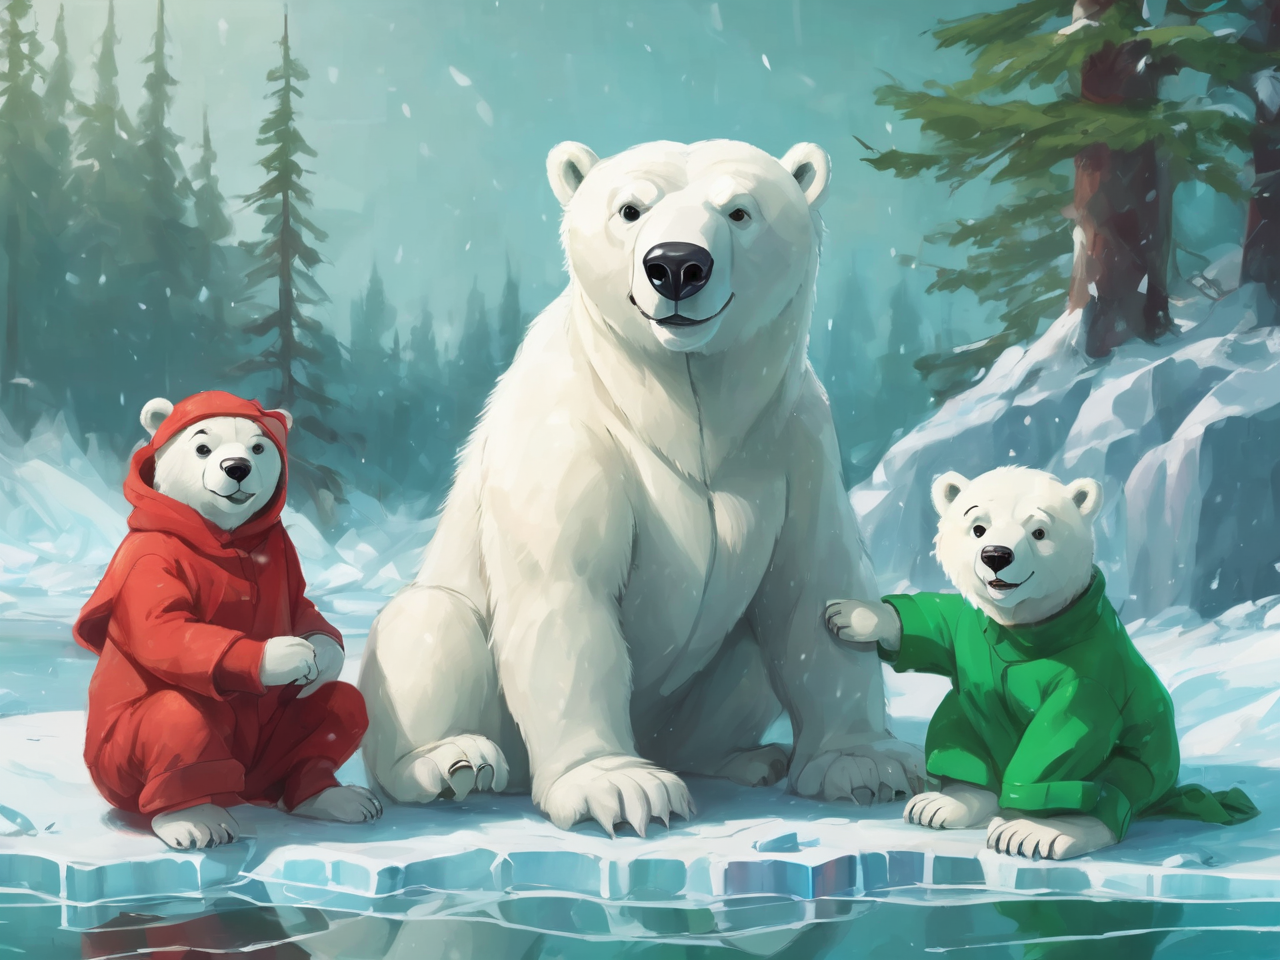 Polar bear cubs, one in a green jacket, one in a red jacket.